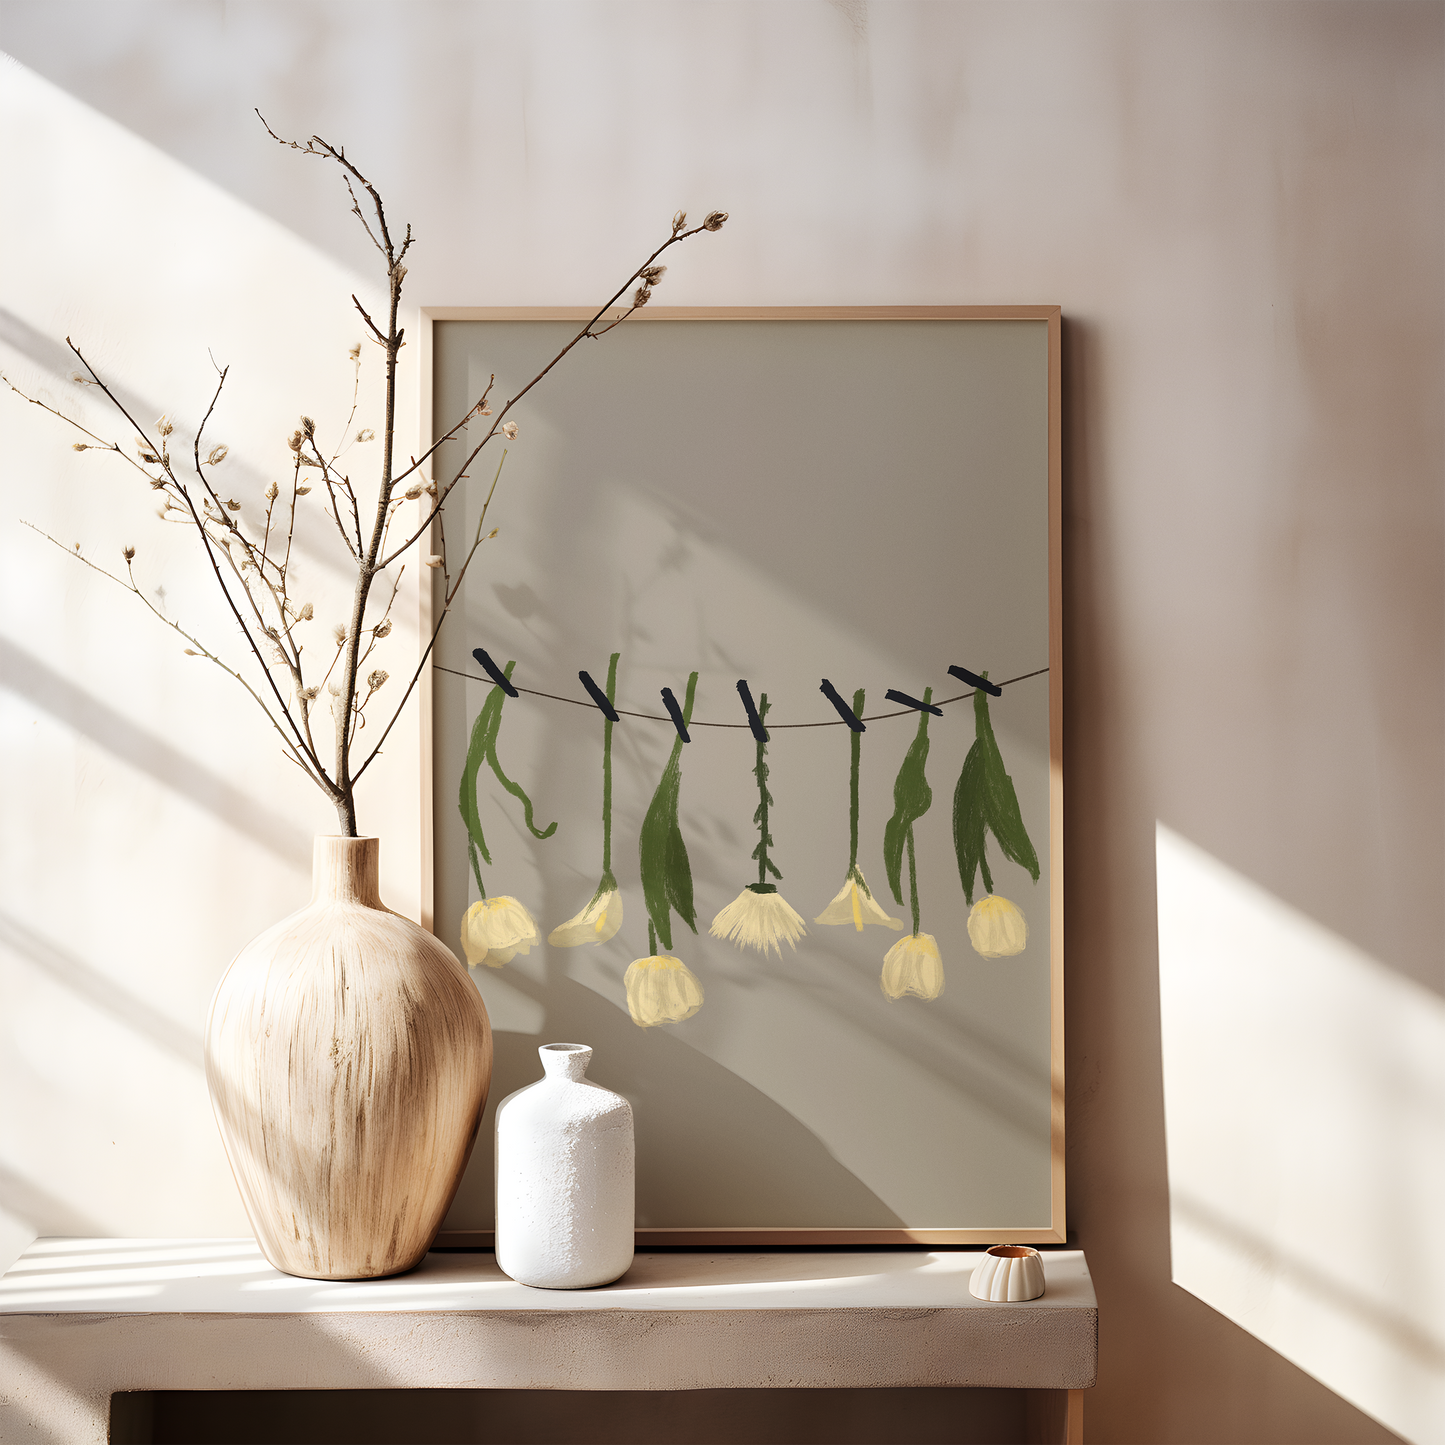 A framed digital print featuring stylized white flowers suspended on a line, placed on a wooden console table with simple ceramic vases and dry branches, casting soft shadows in natural light